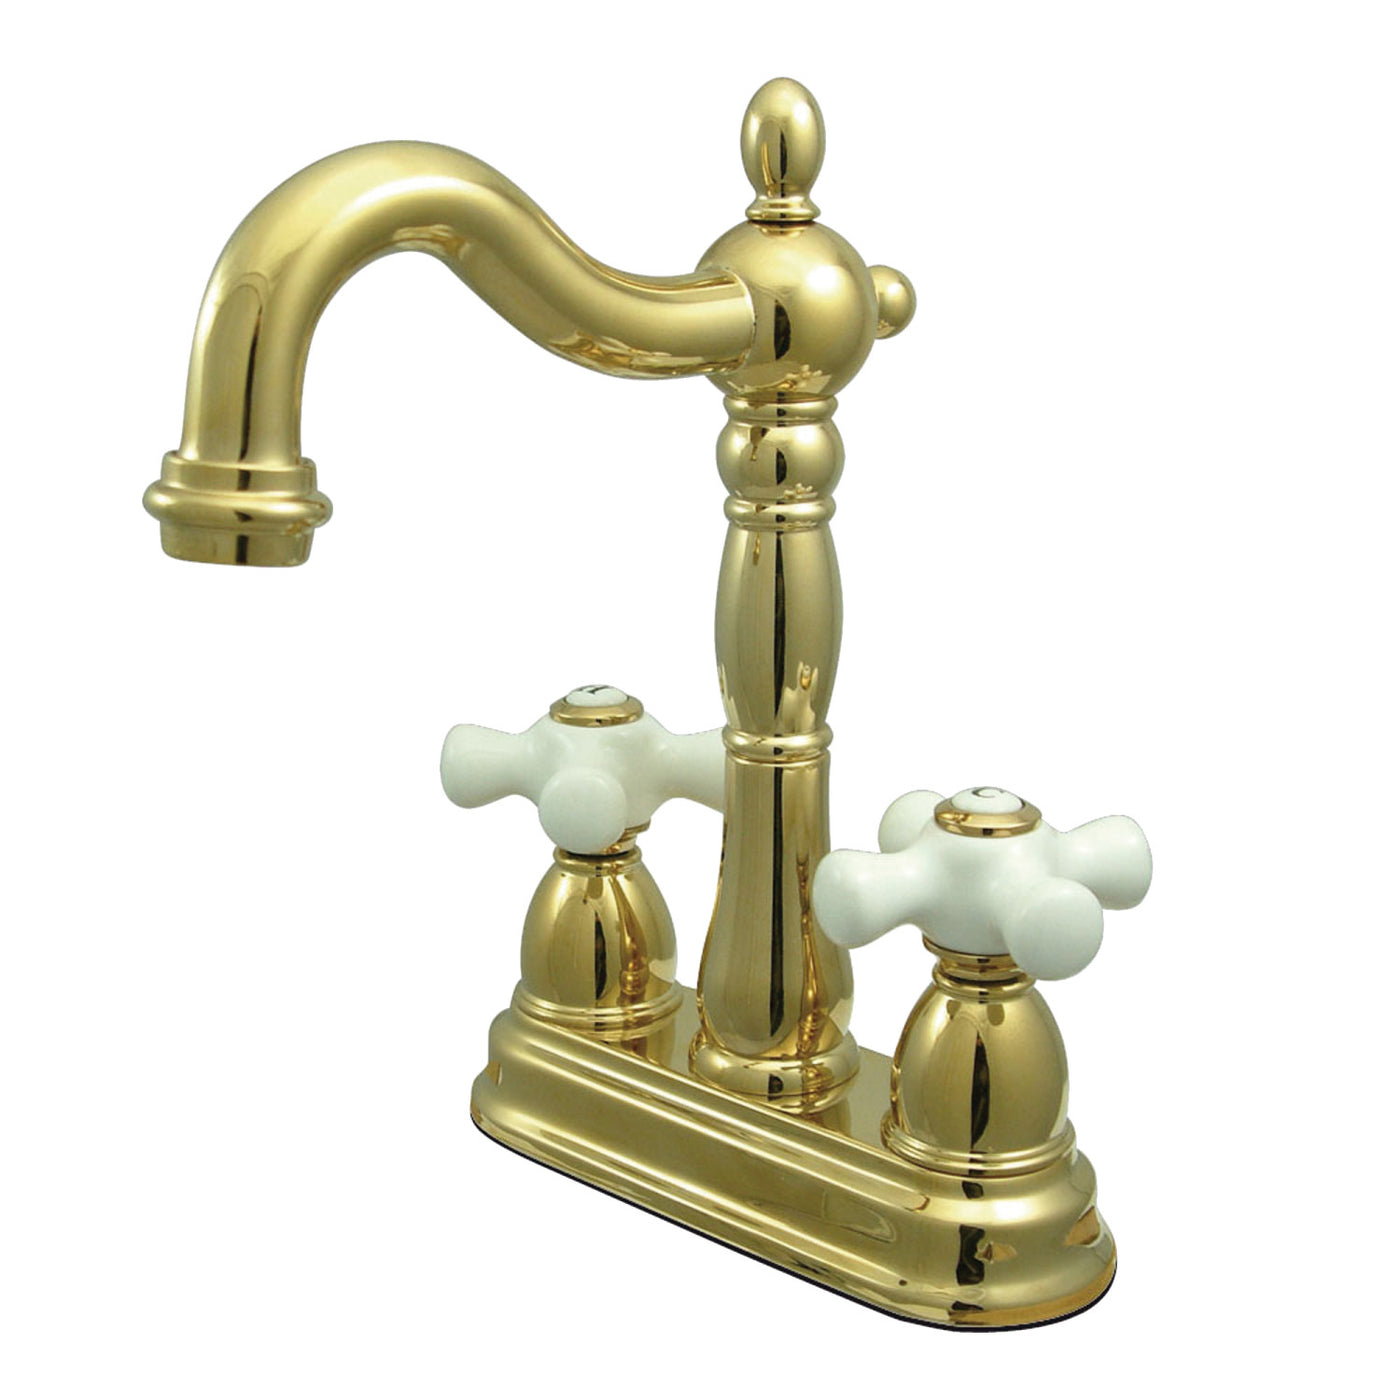 Elements of Design EB1492PX 4-Inch Centerset Bar Faucet, Polished Brass